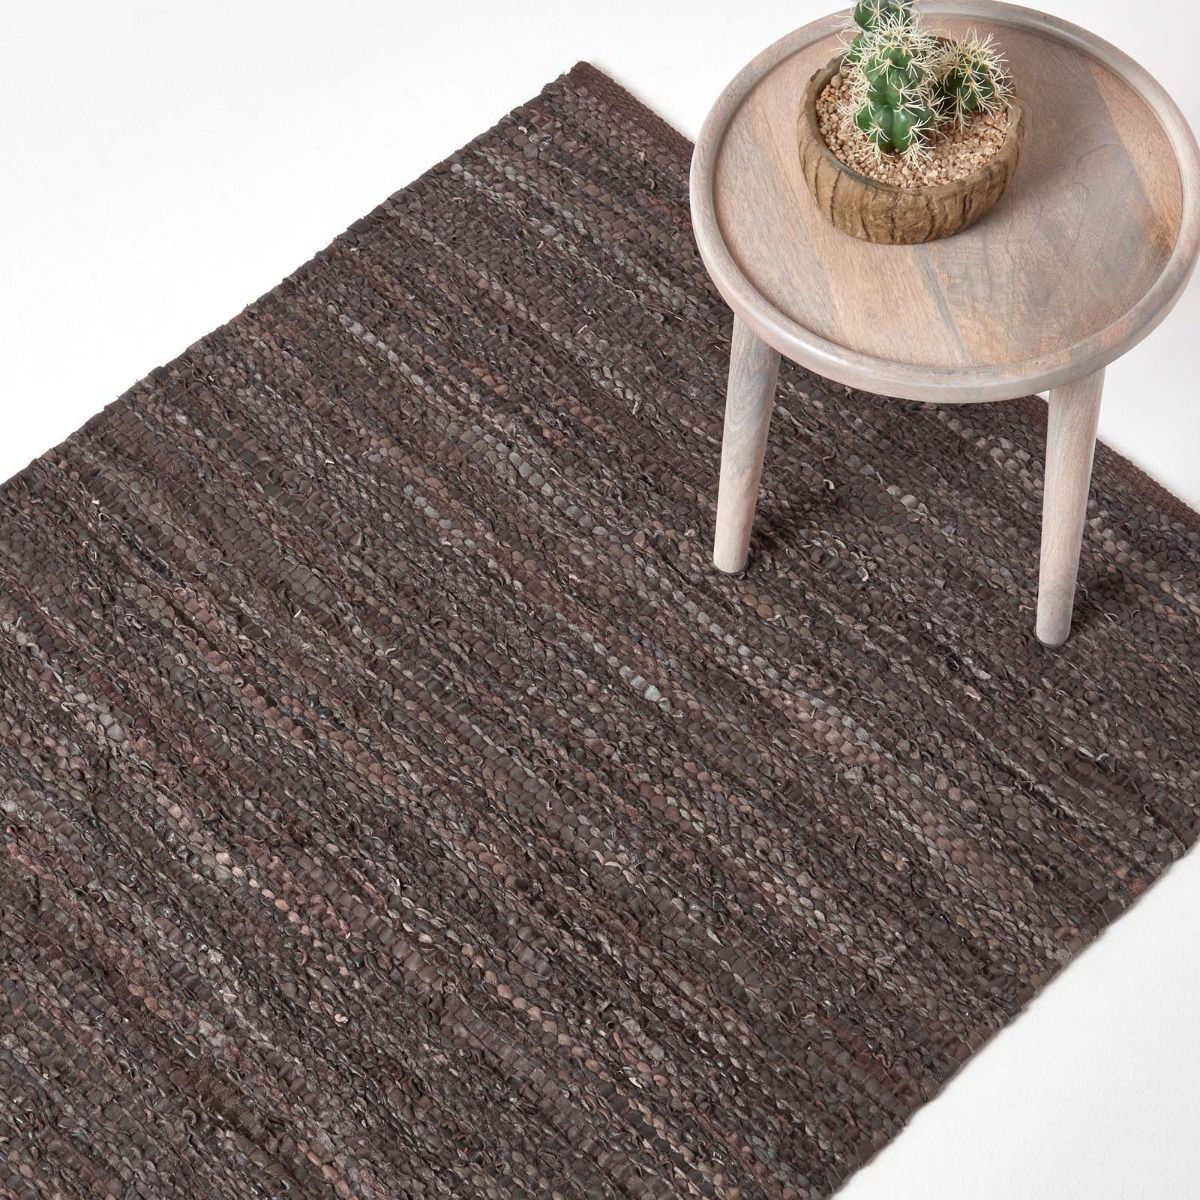 Denver Leather Woven Rug Brown, Leather Woven Rug